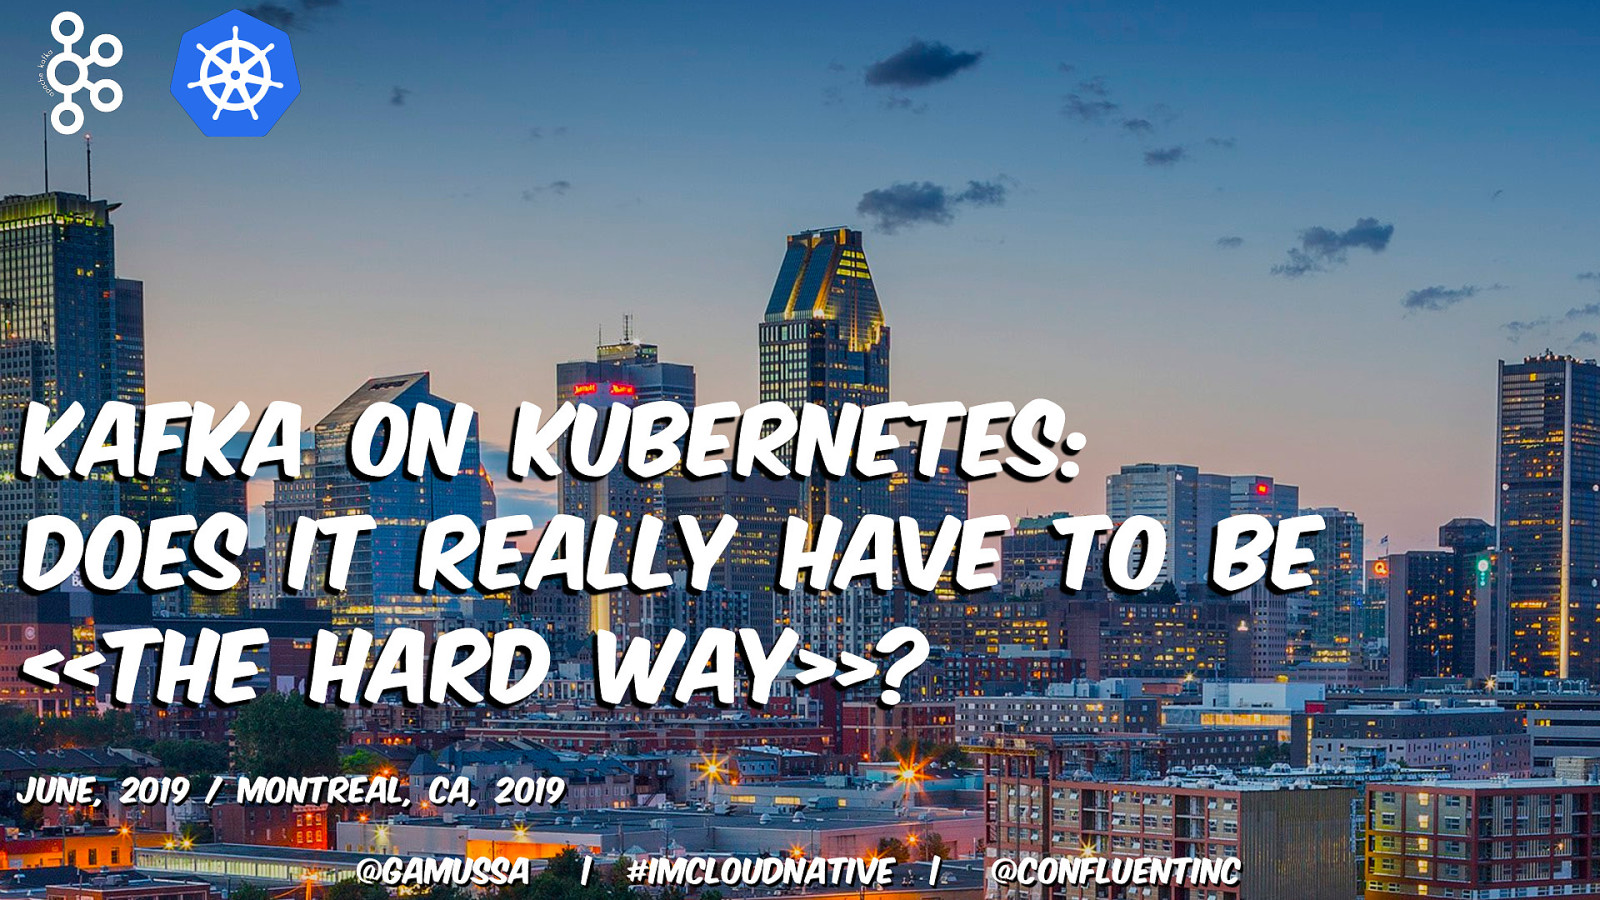 Kafka on Kubernetes: Does it really have to be “The Hard Way”?